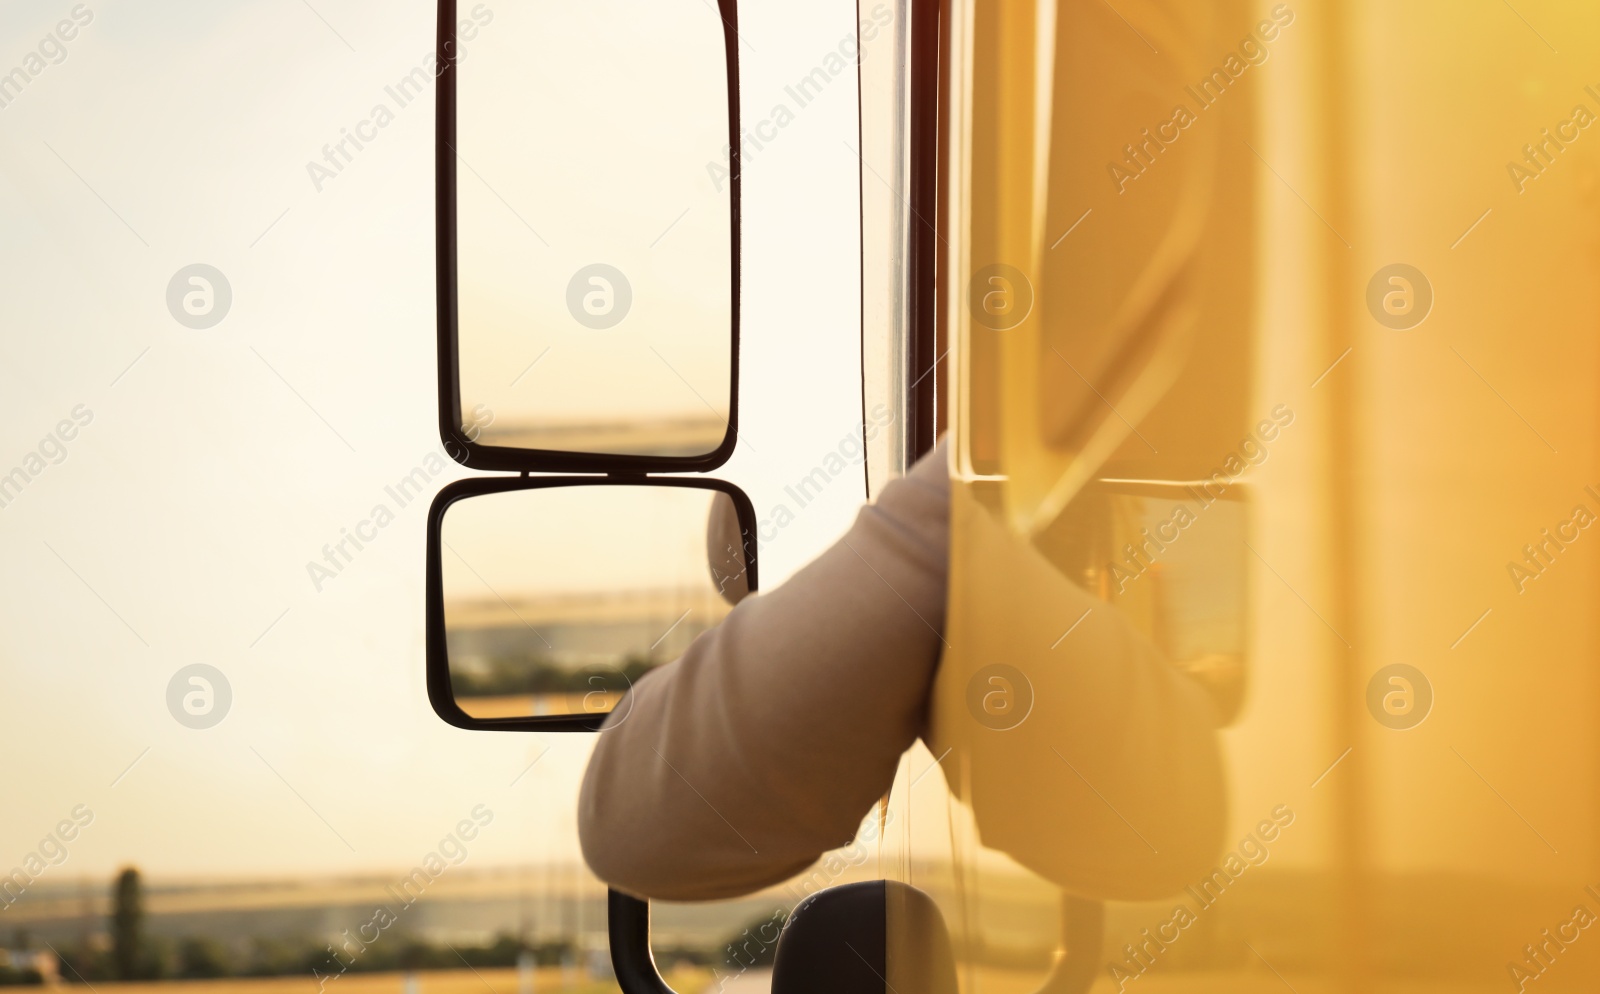 Photo of Man driving modern truck on country road